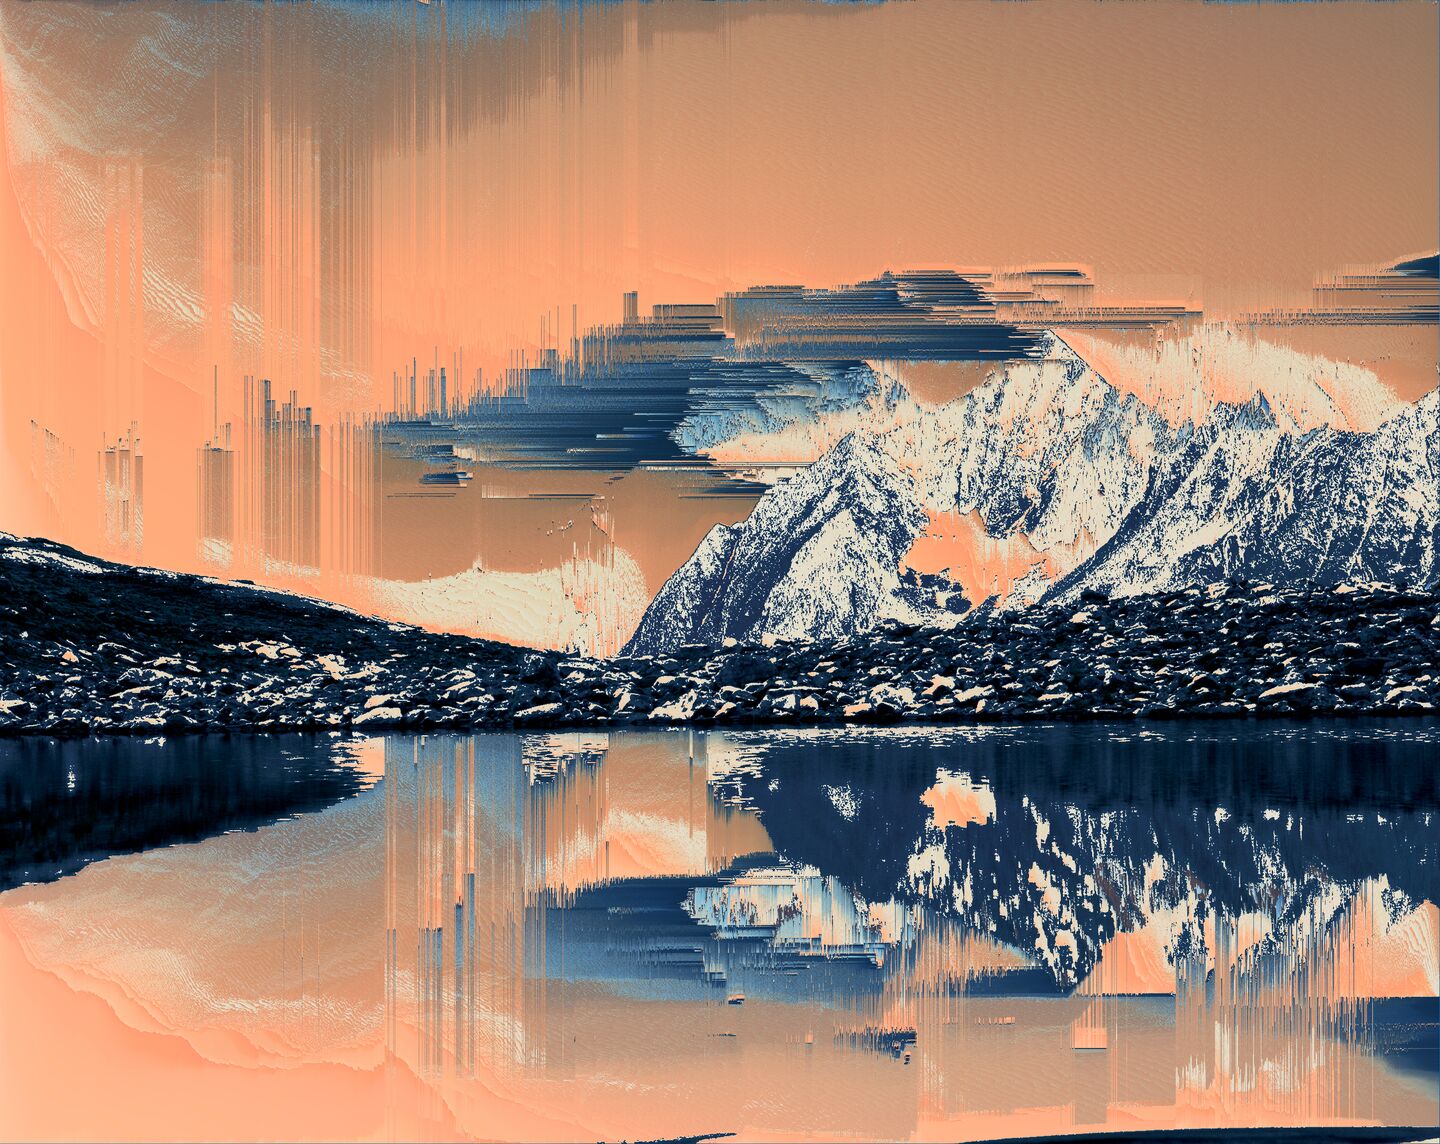 A glitchy image of a mountain range, in oranges and blues